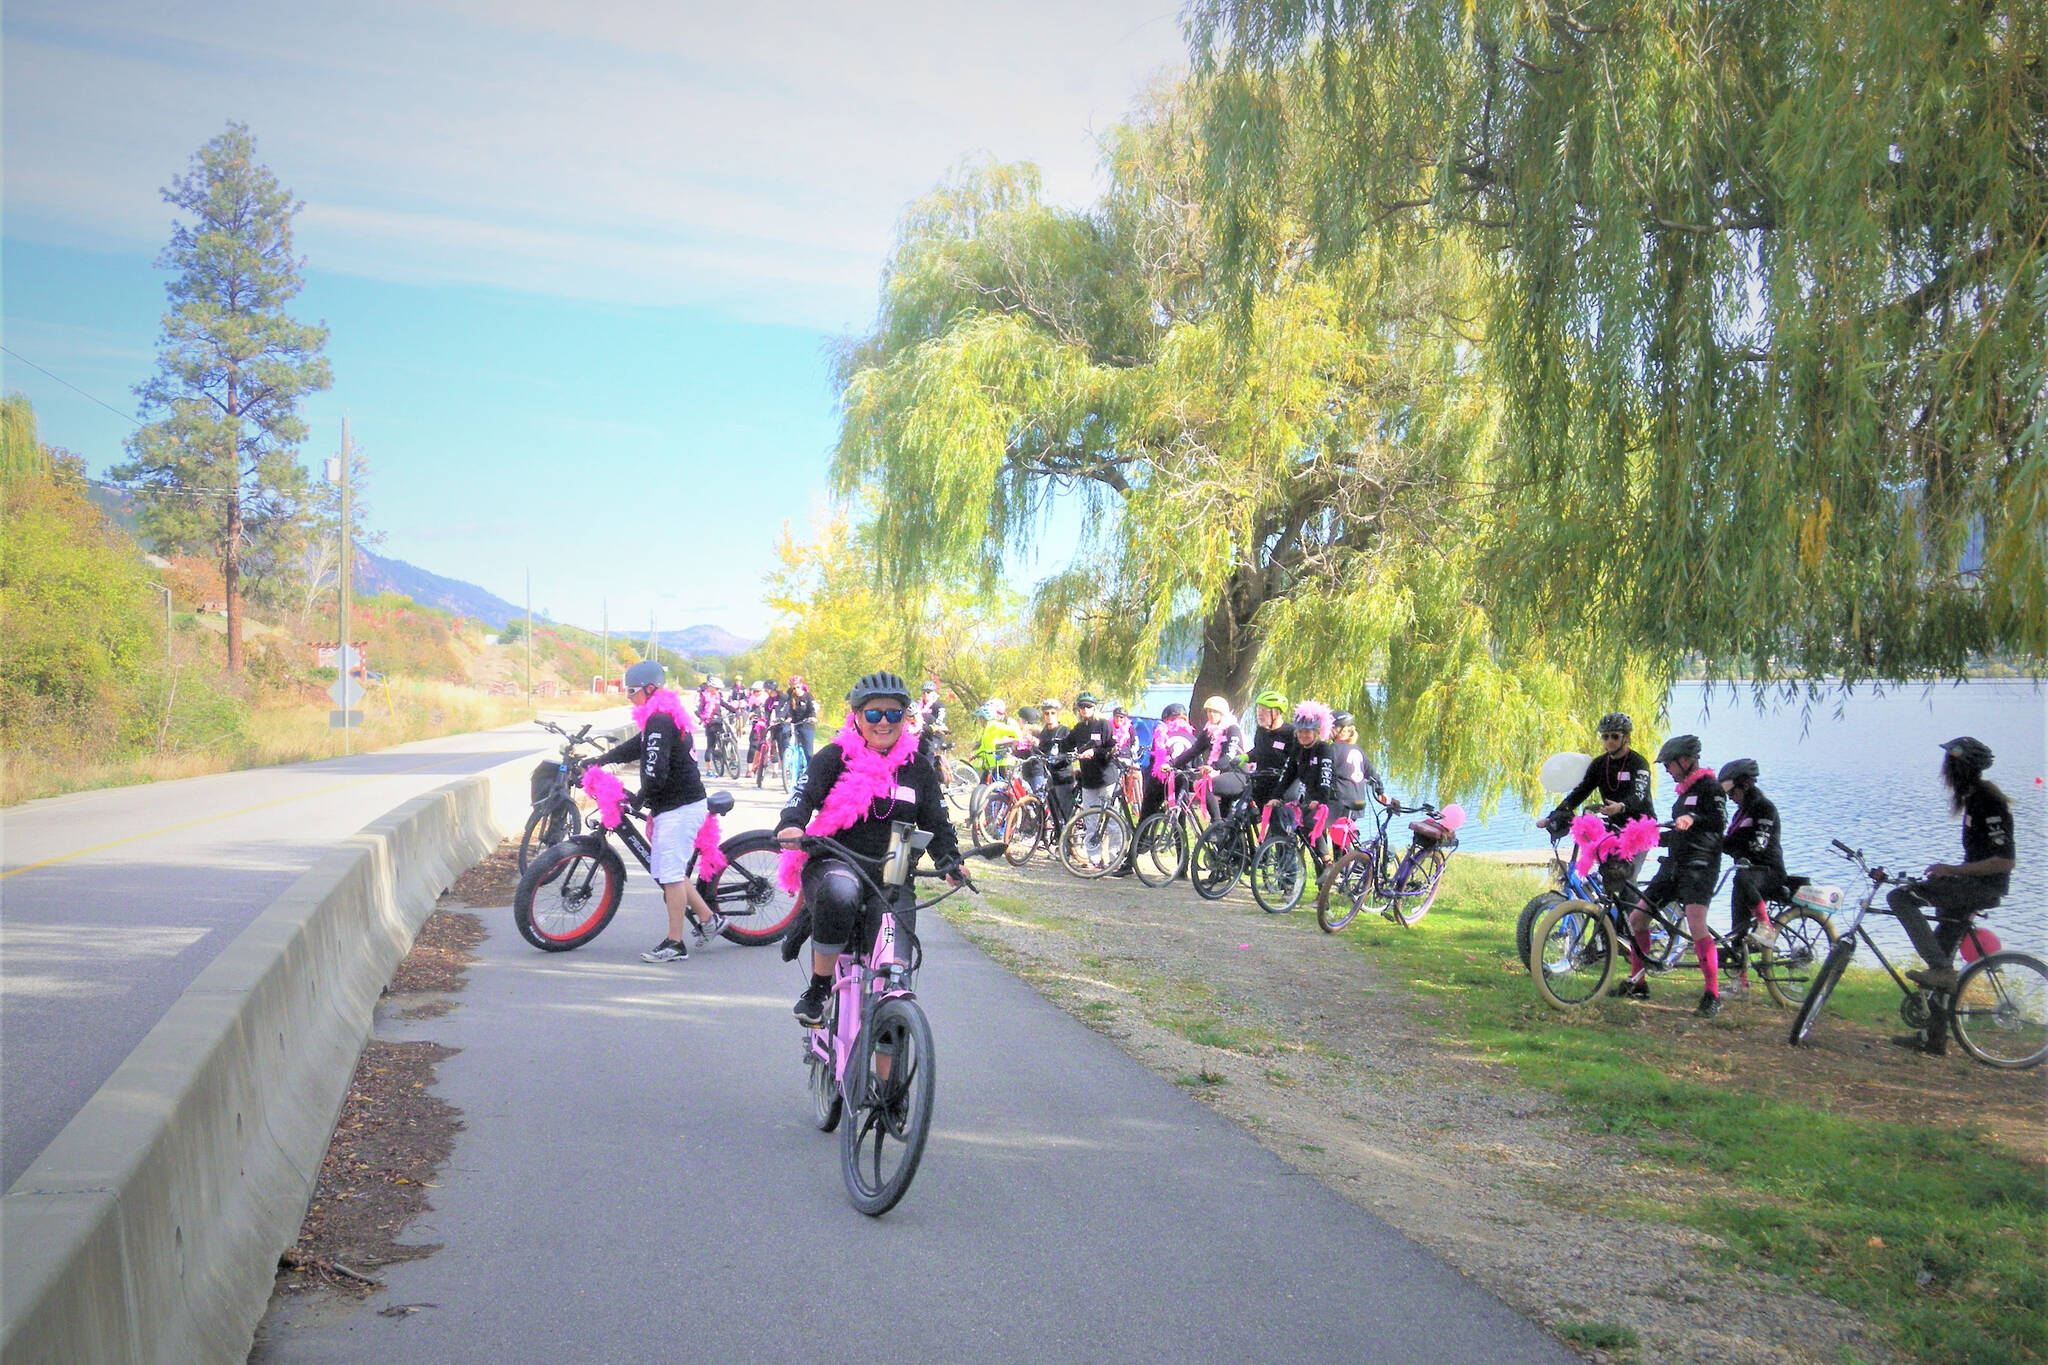 Tena McKenzie leads riders around Wood Lake on the Okanagan Rail Trail Sunday, Oct. 4 for the CIBC Run for the Cure, where she adapted the event to a Ride for the Cure. (J.P. Squire photo)